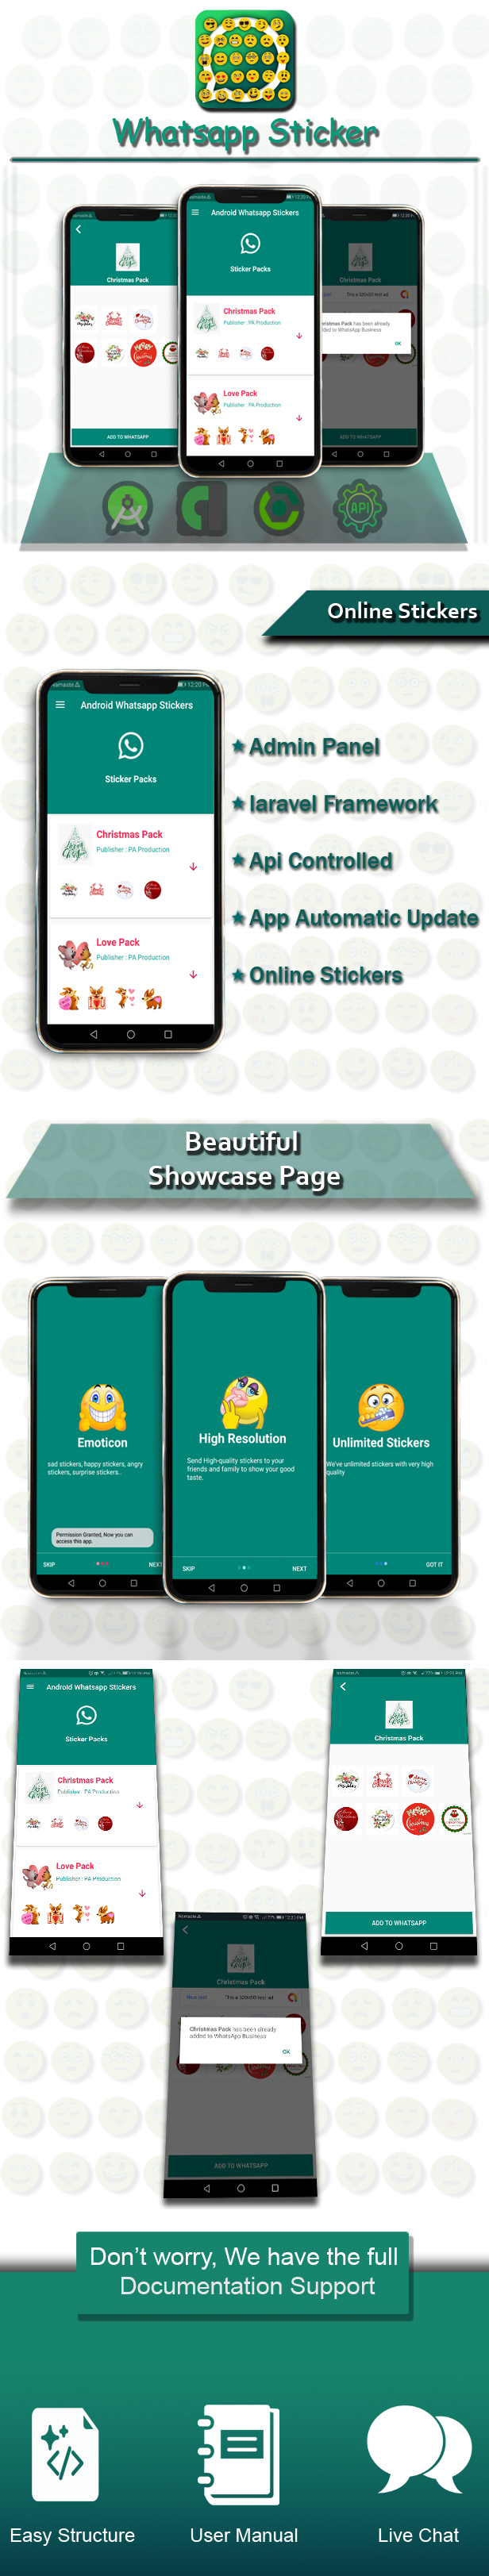 Online Stickers for Whatsapp - Admin Panel | Beautiful UI | Material Design | Admob Ads - 4